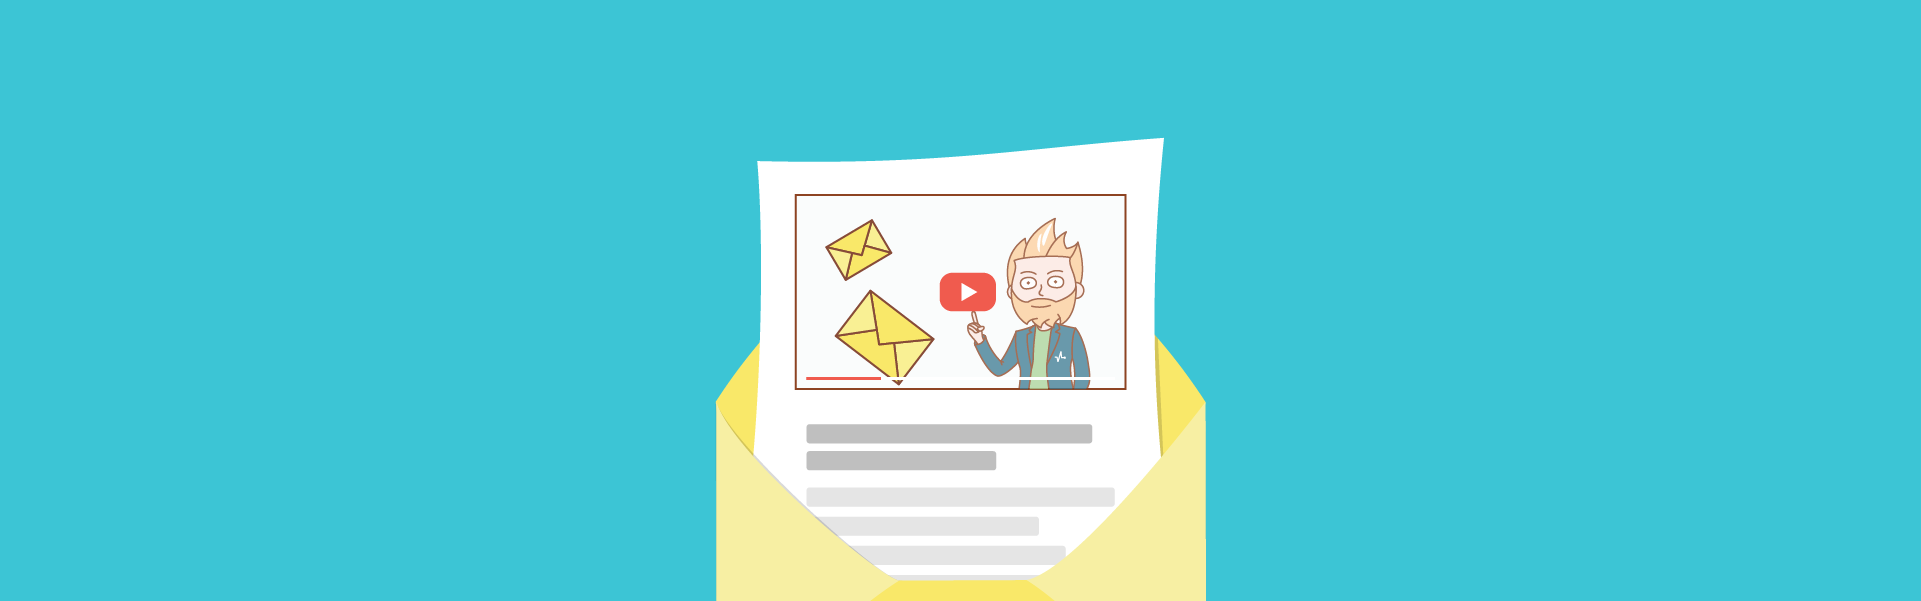 Video Email Marketing: How to Get Started and What to Expect